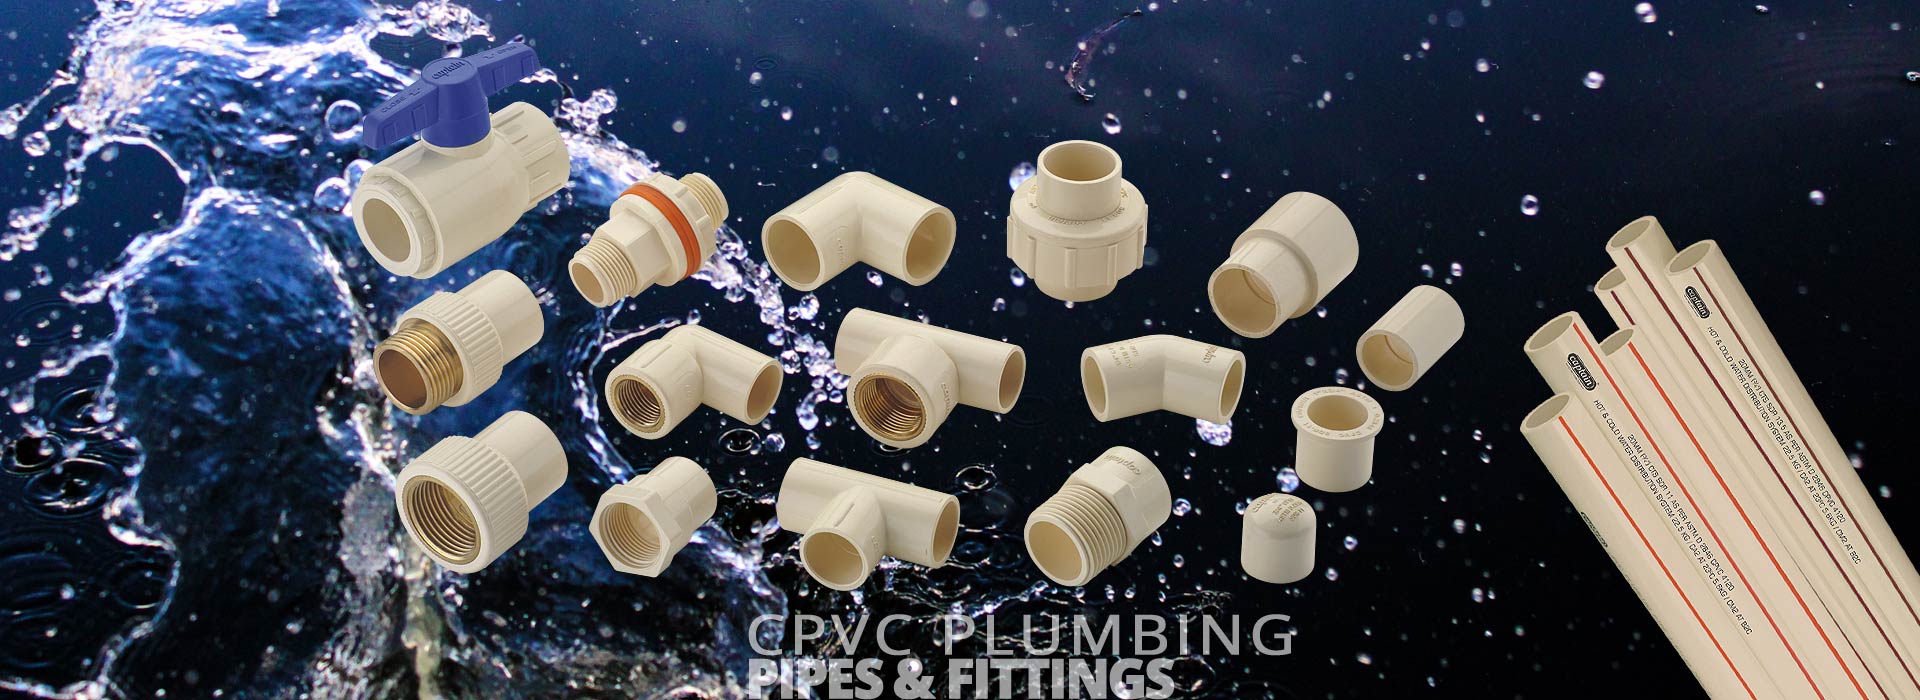 CPVC Plumbing Pipes and Fittings from Captain Pipes Ltd.